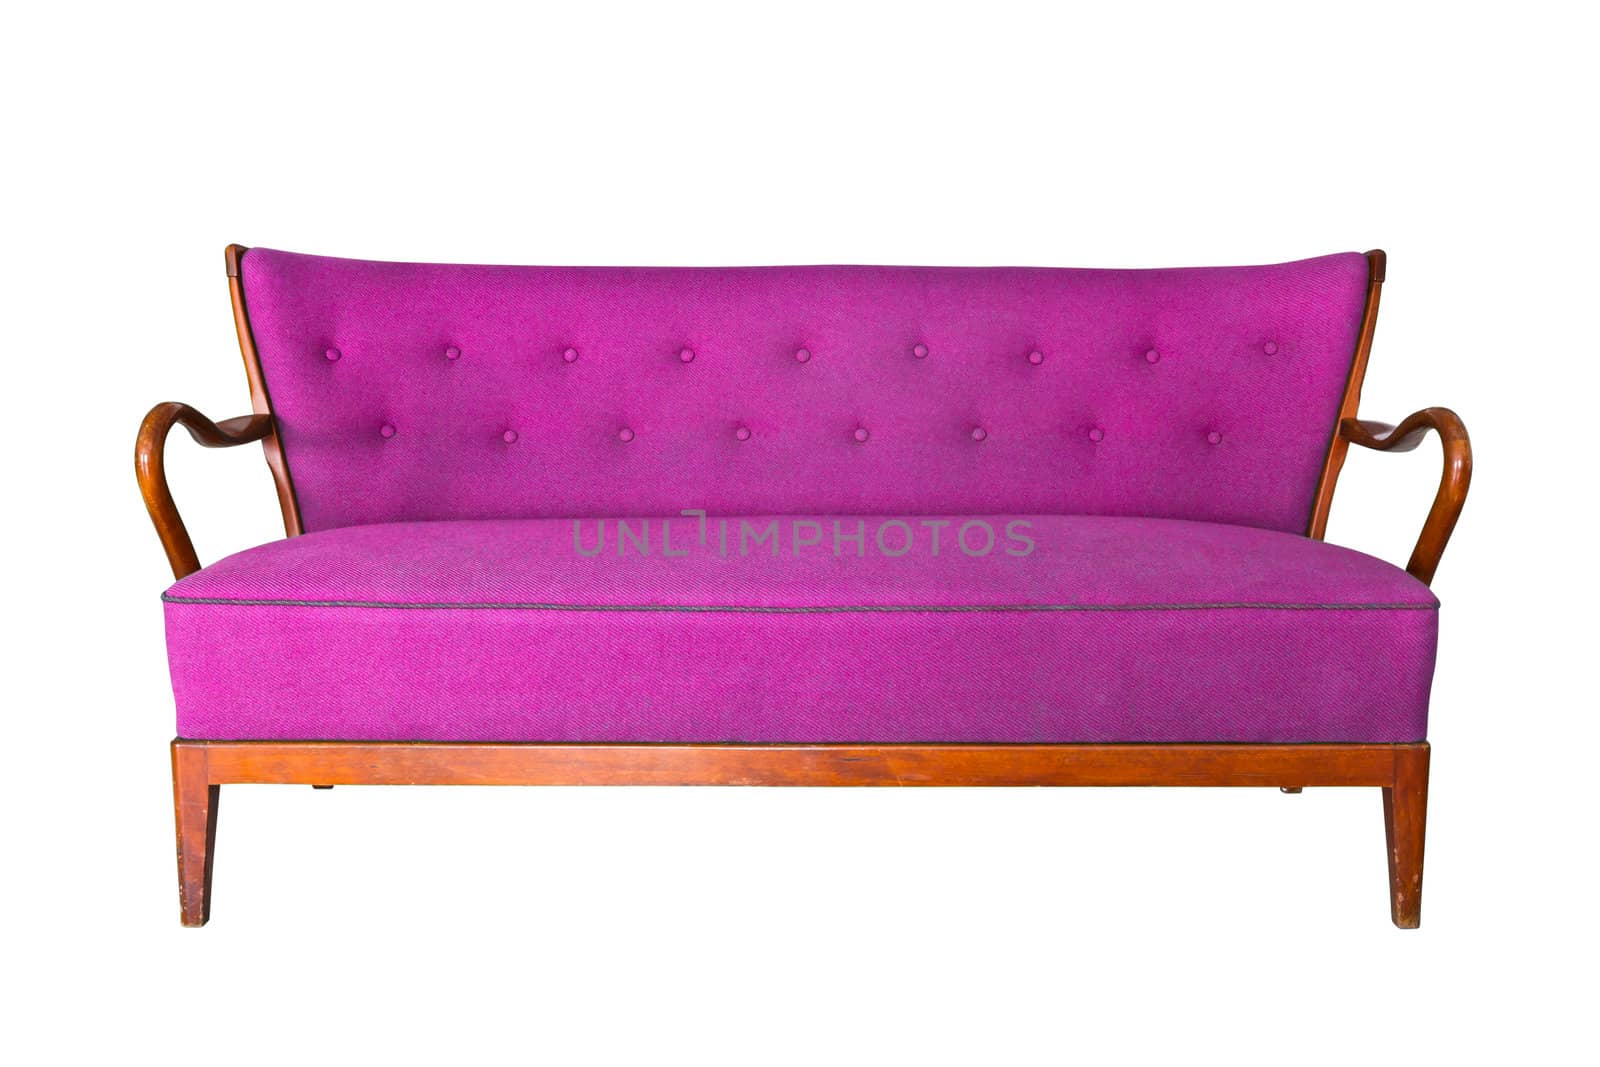 purple sofa isolated with clipping path by tungphoto